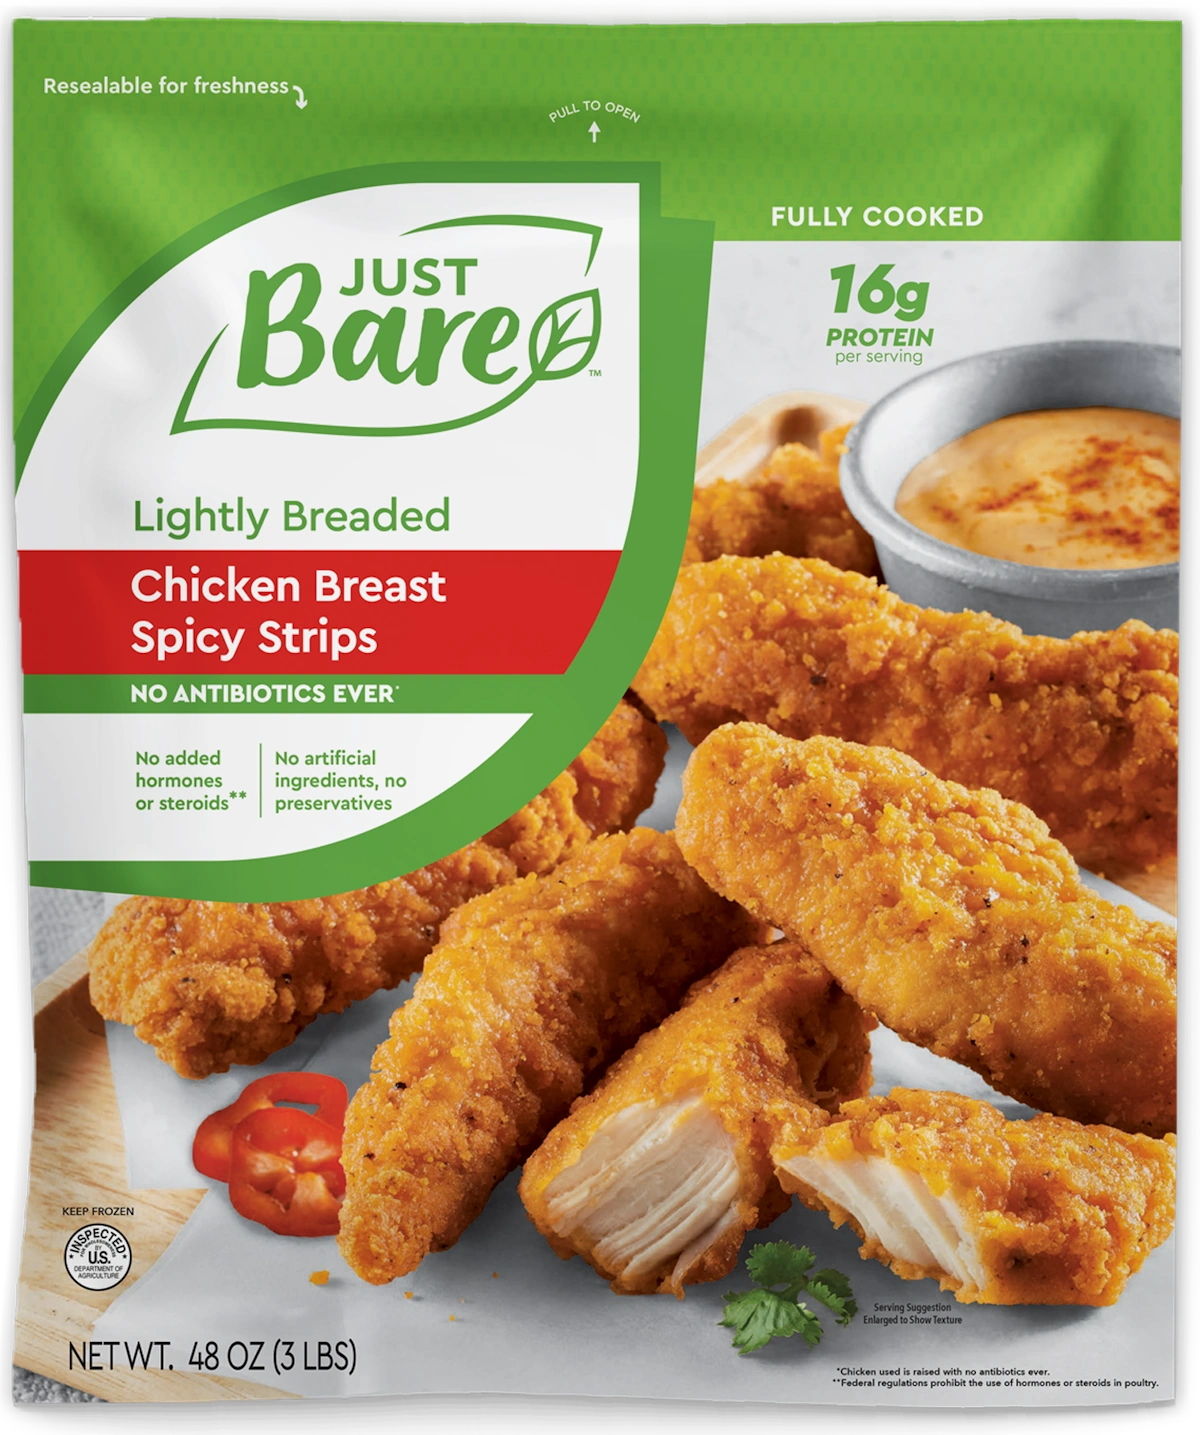 Just Bare - Just Bare, Chicken Breast Bites, Lightly Breaded (24